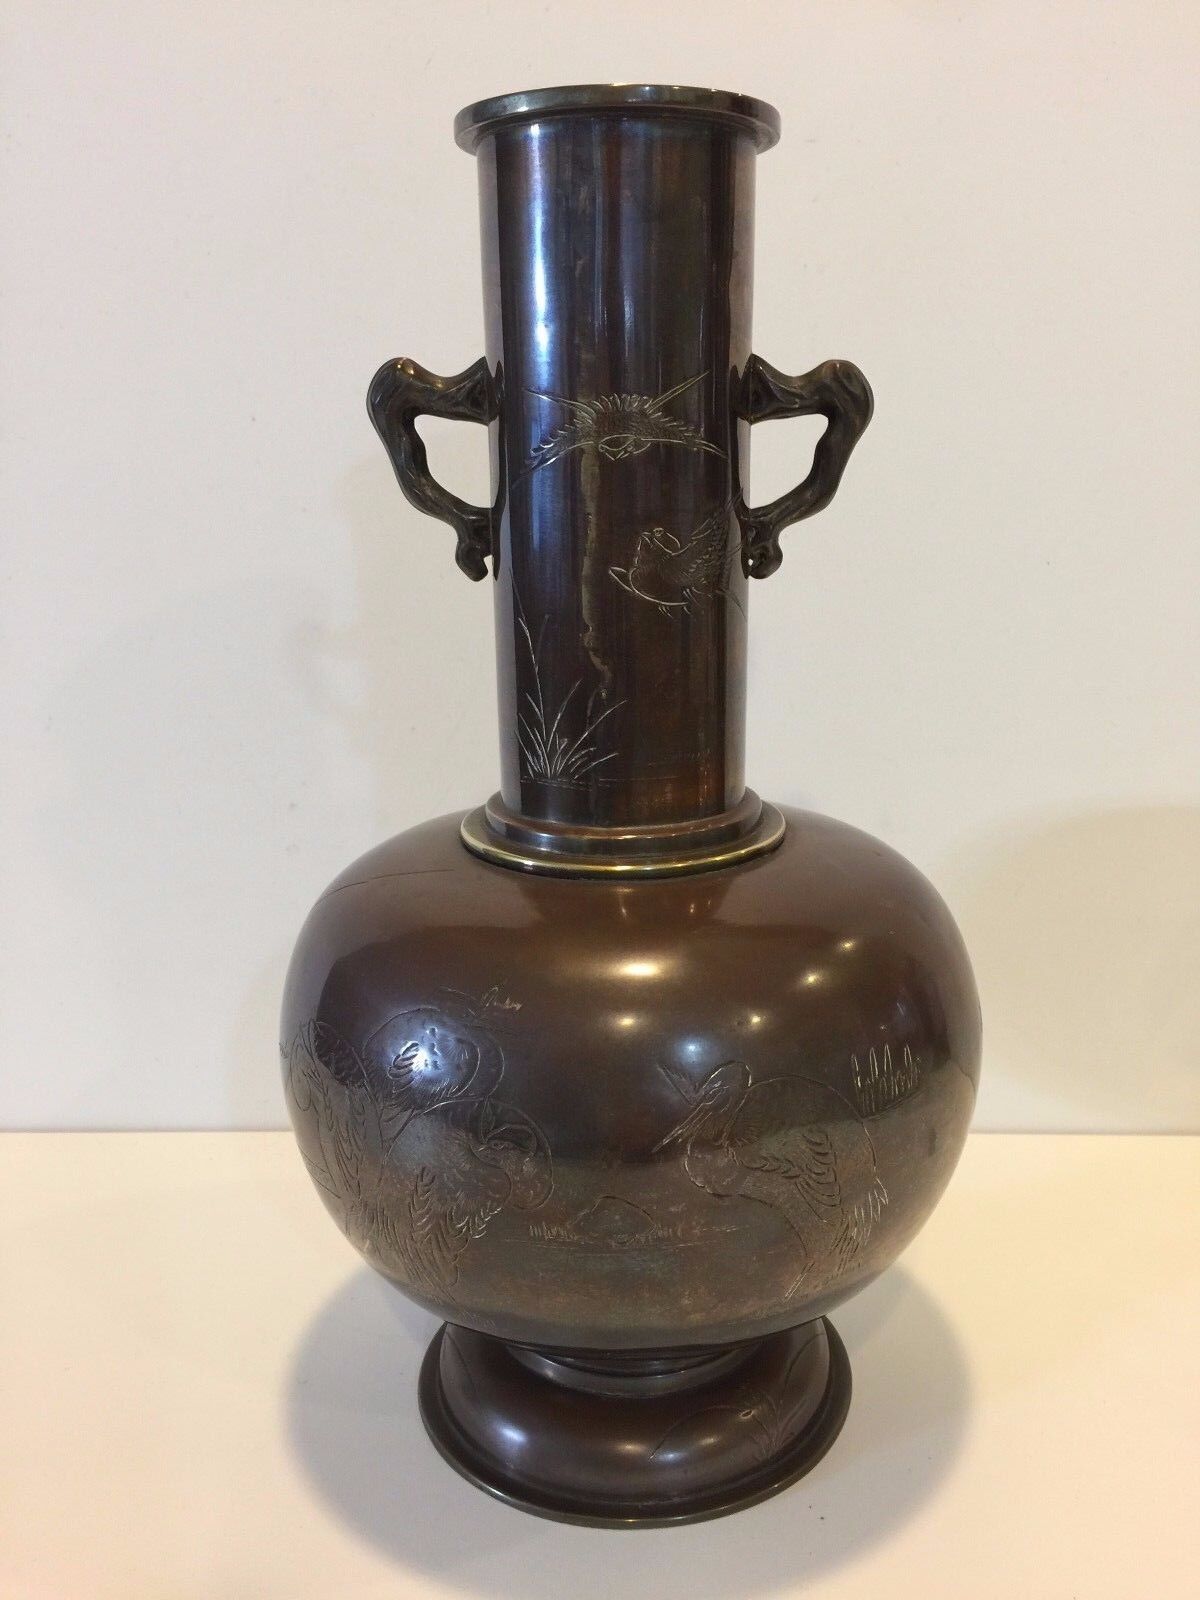 Vintage Chinese/Japanese Hand Chased Landscape Bronze Vase w/Ears, Signed by 程啓